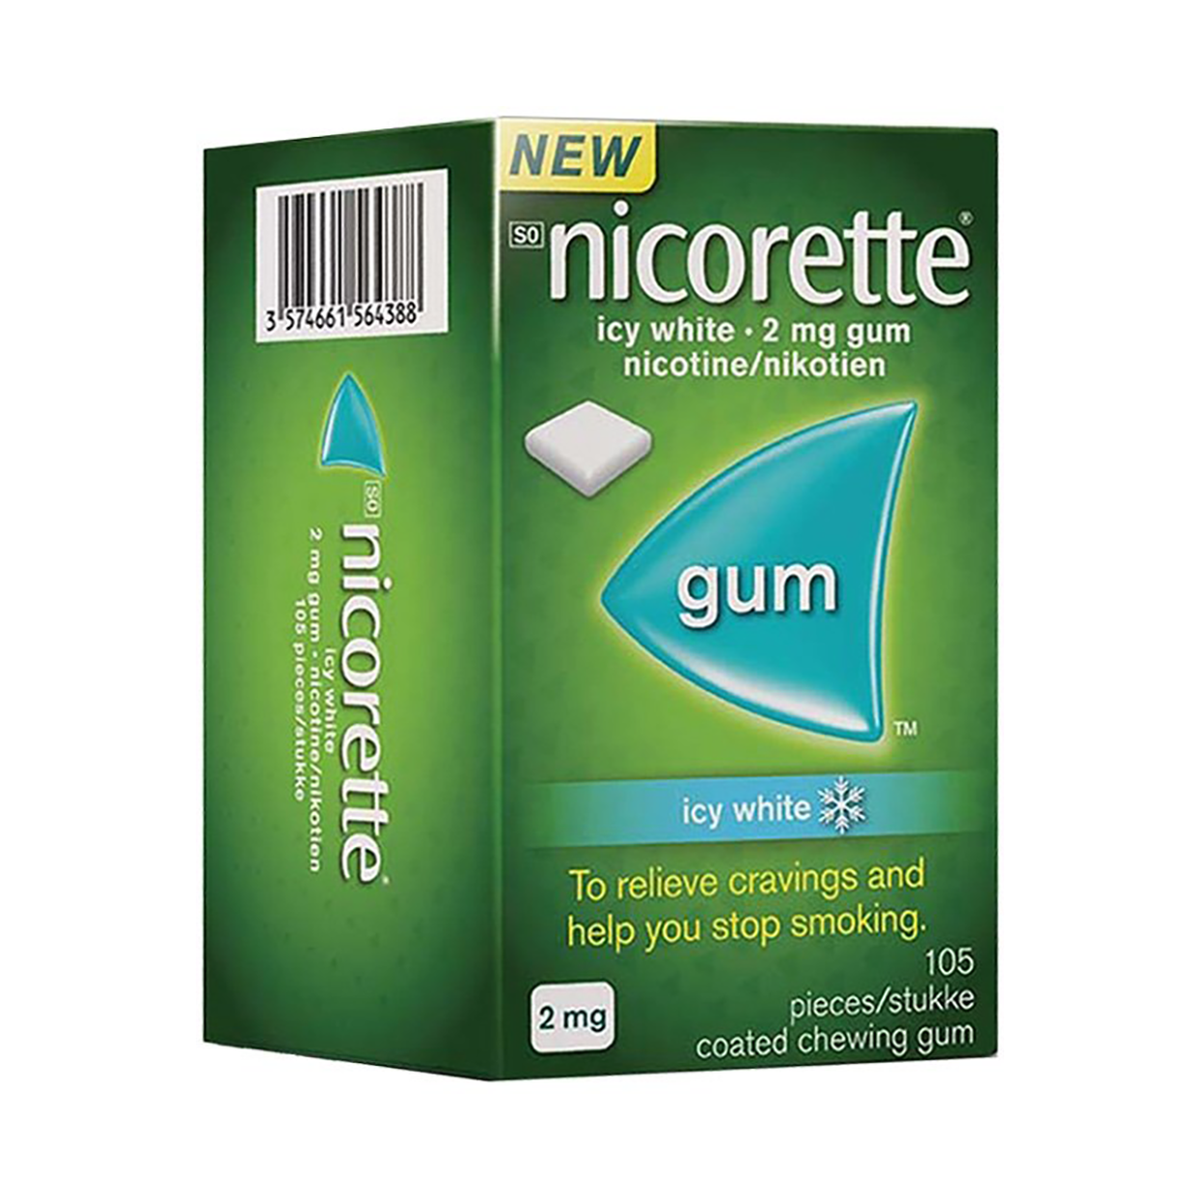 nicorette-gum-icy-white-2mg-105-pieces-med365